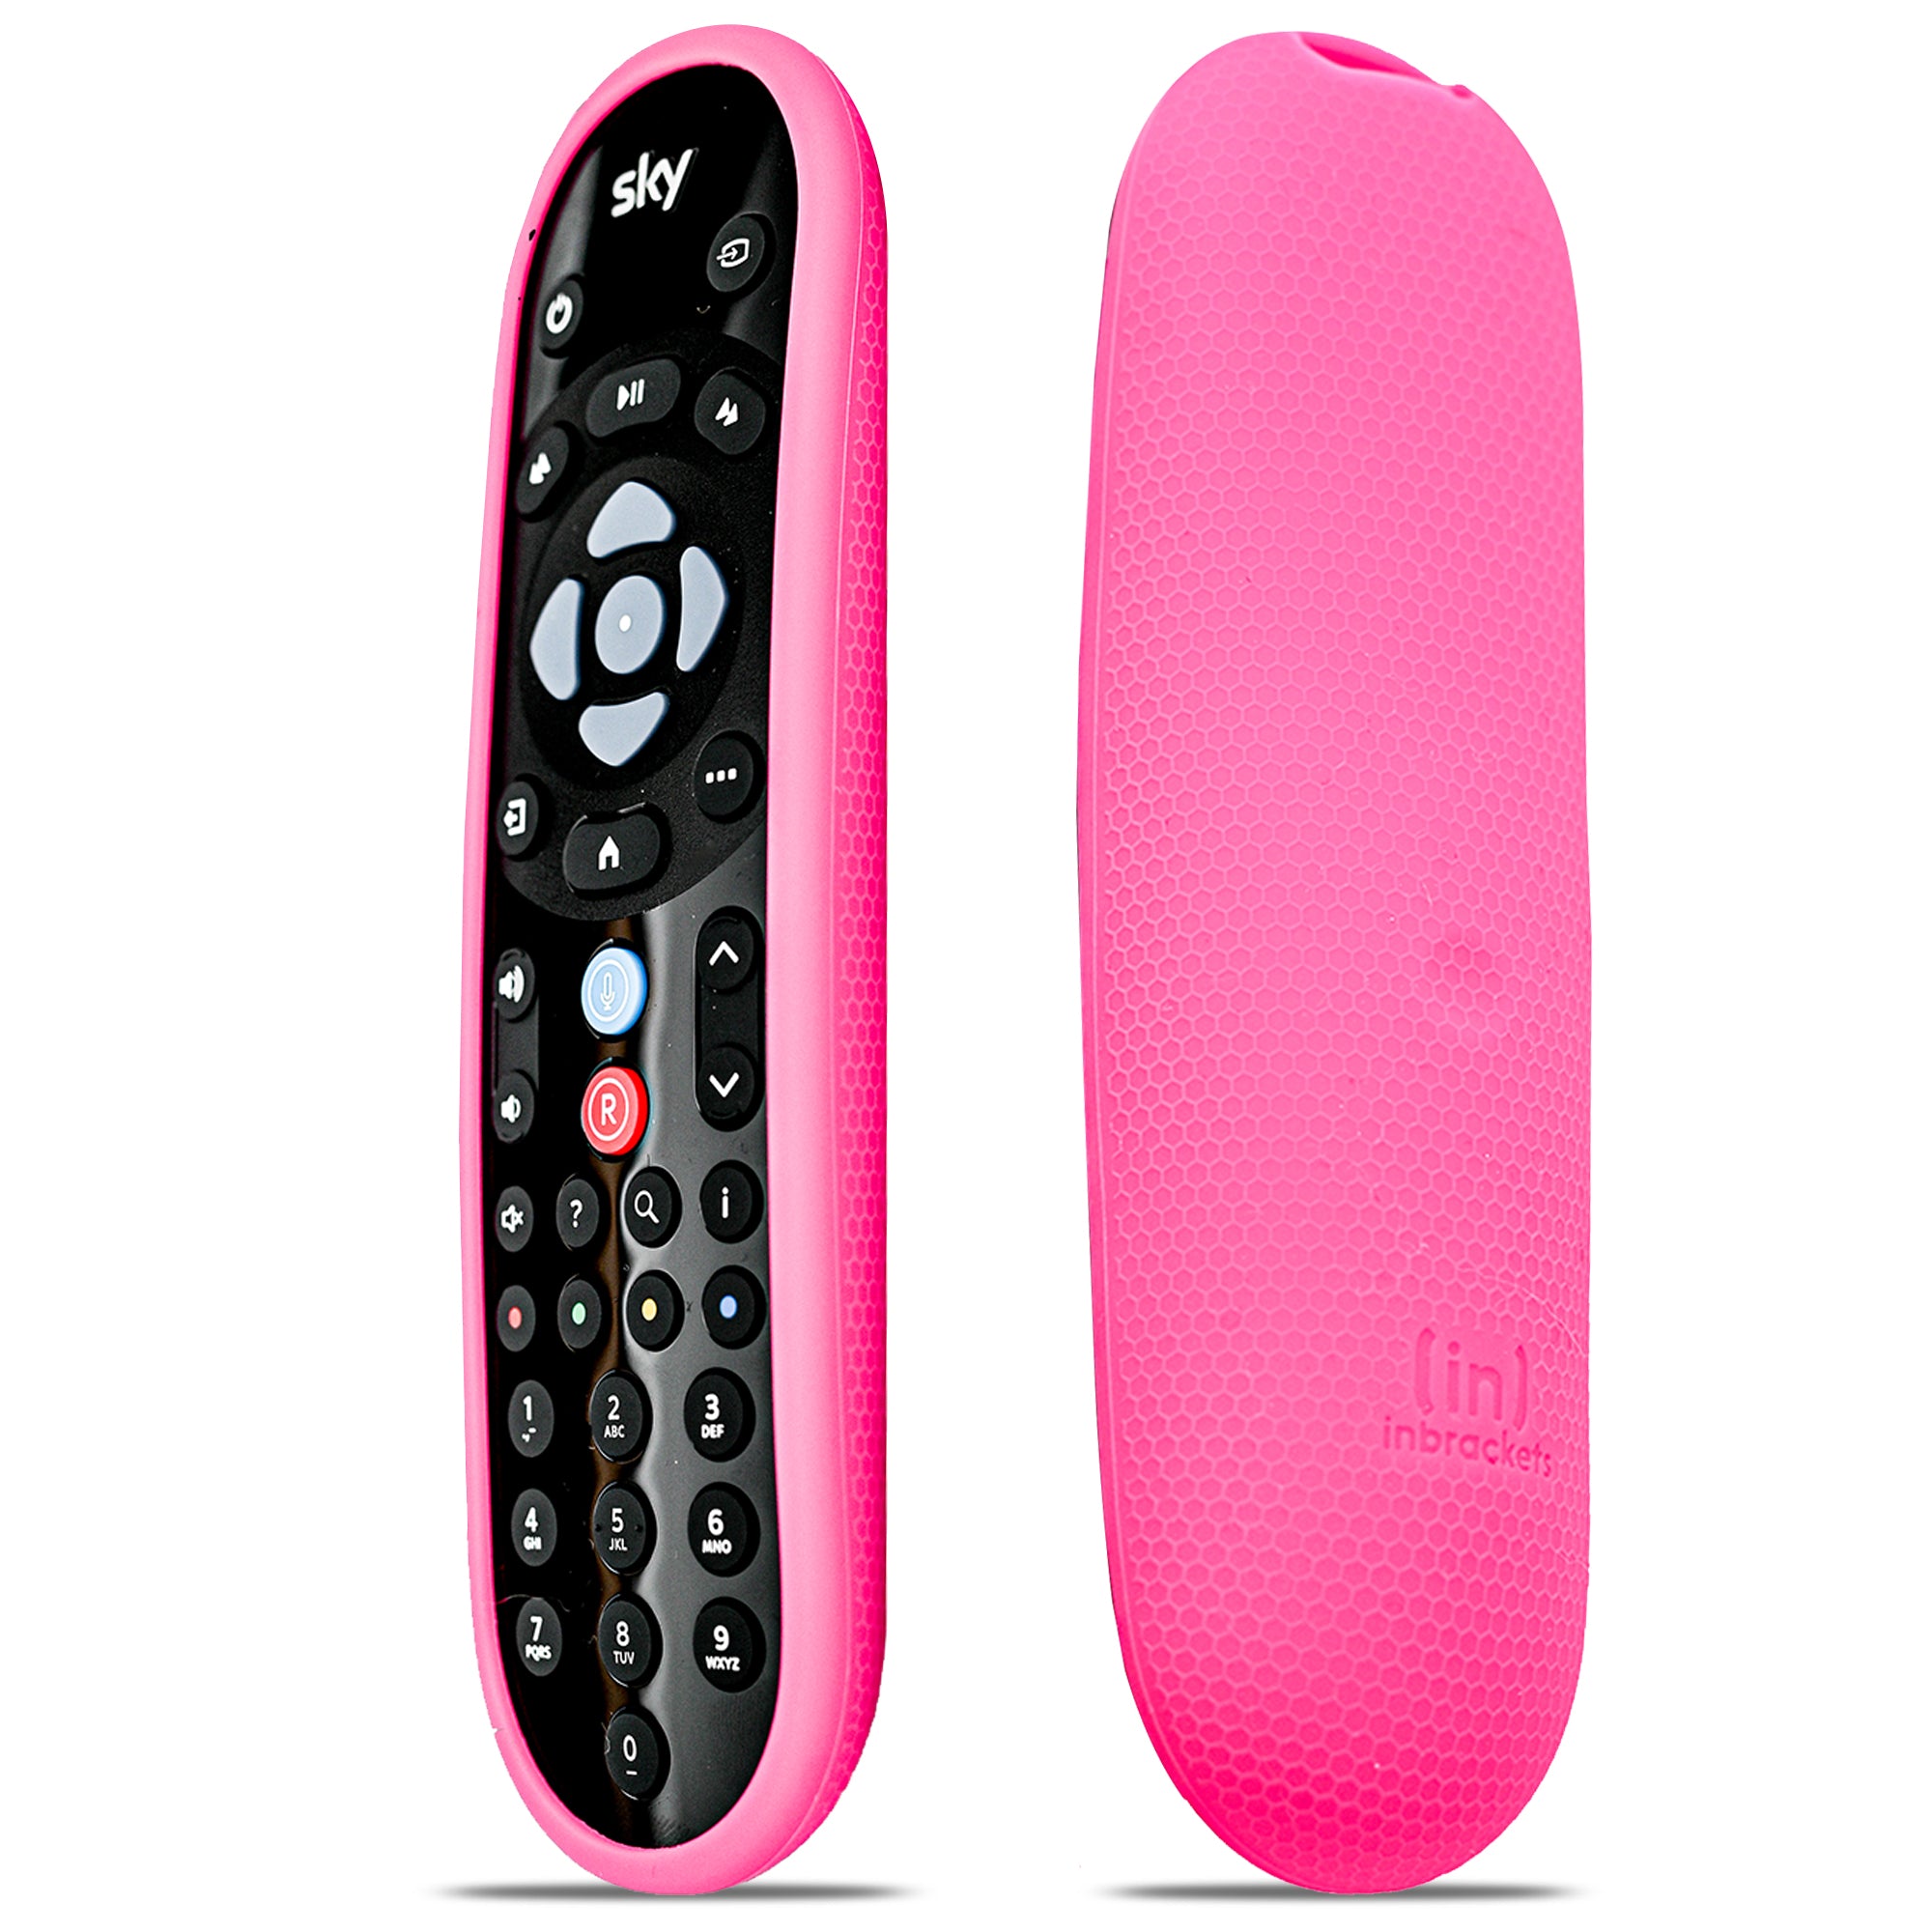 Sky Q Remote Cover Protective Case (Pink)